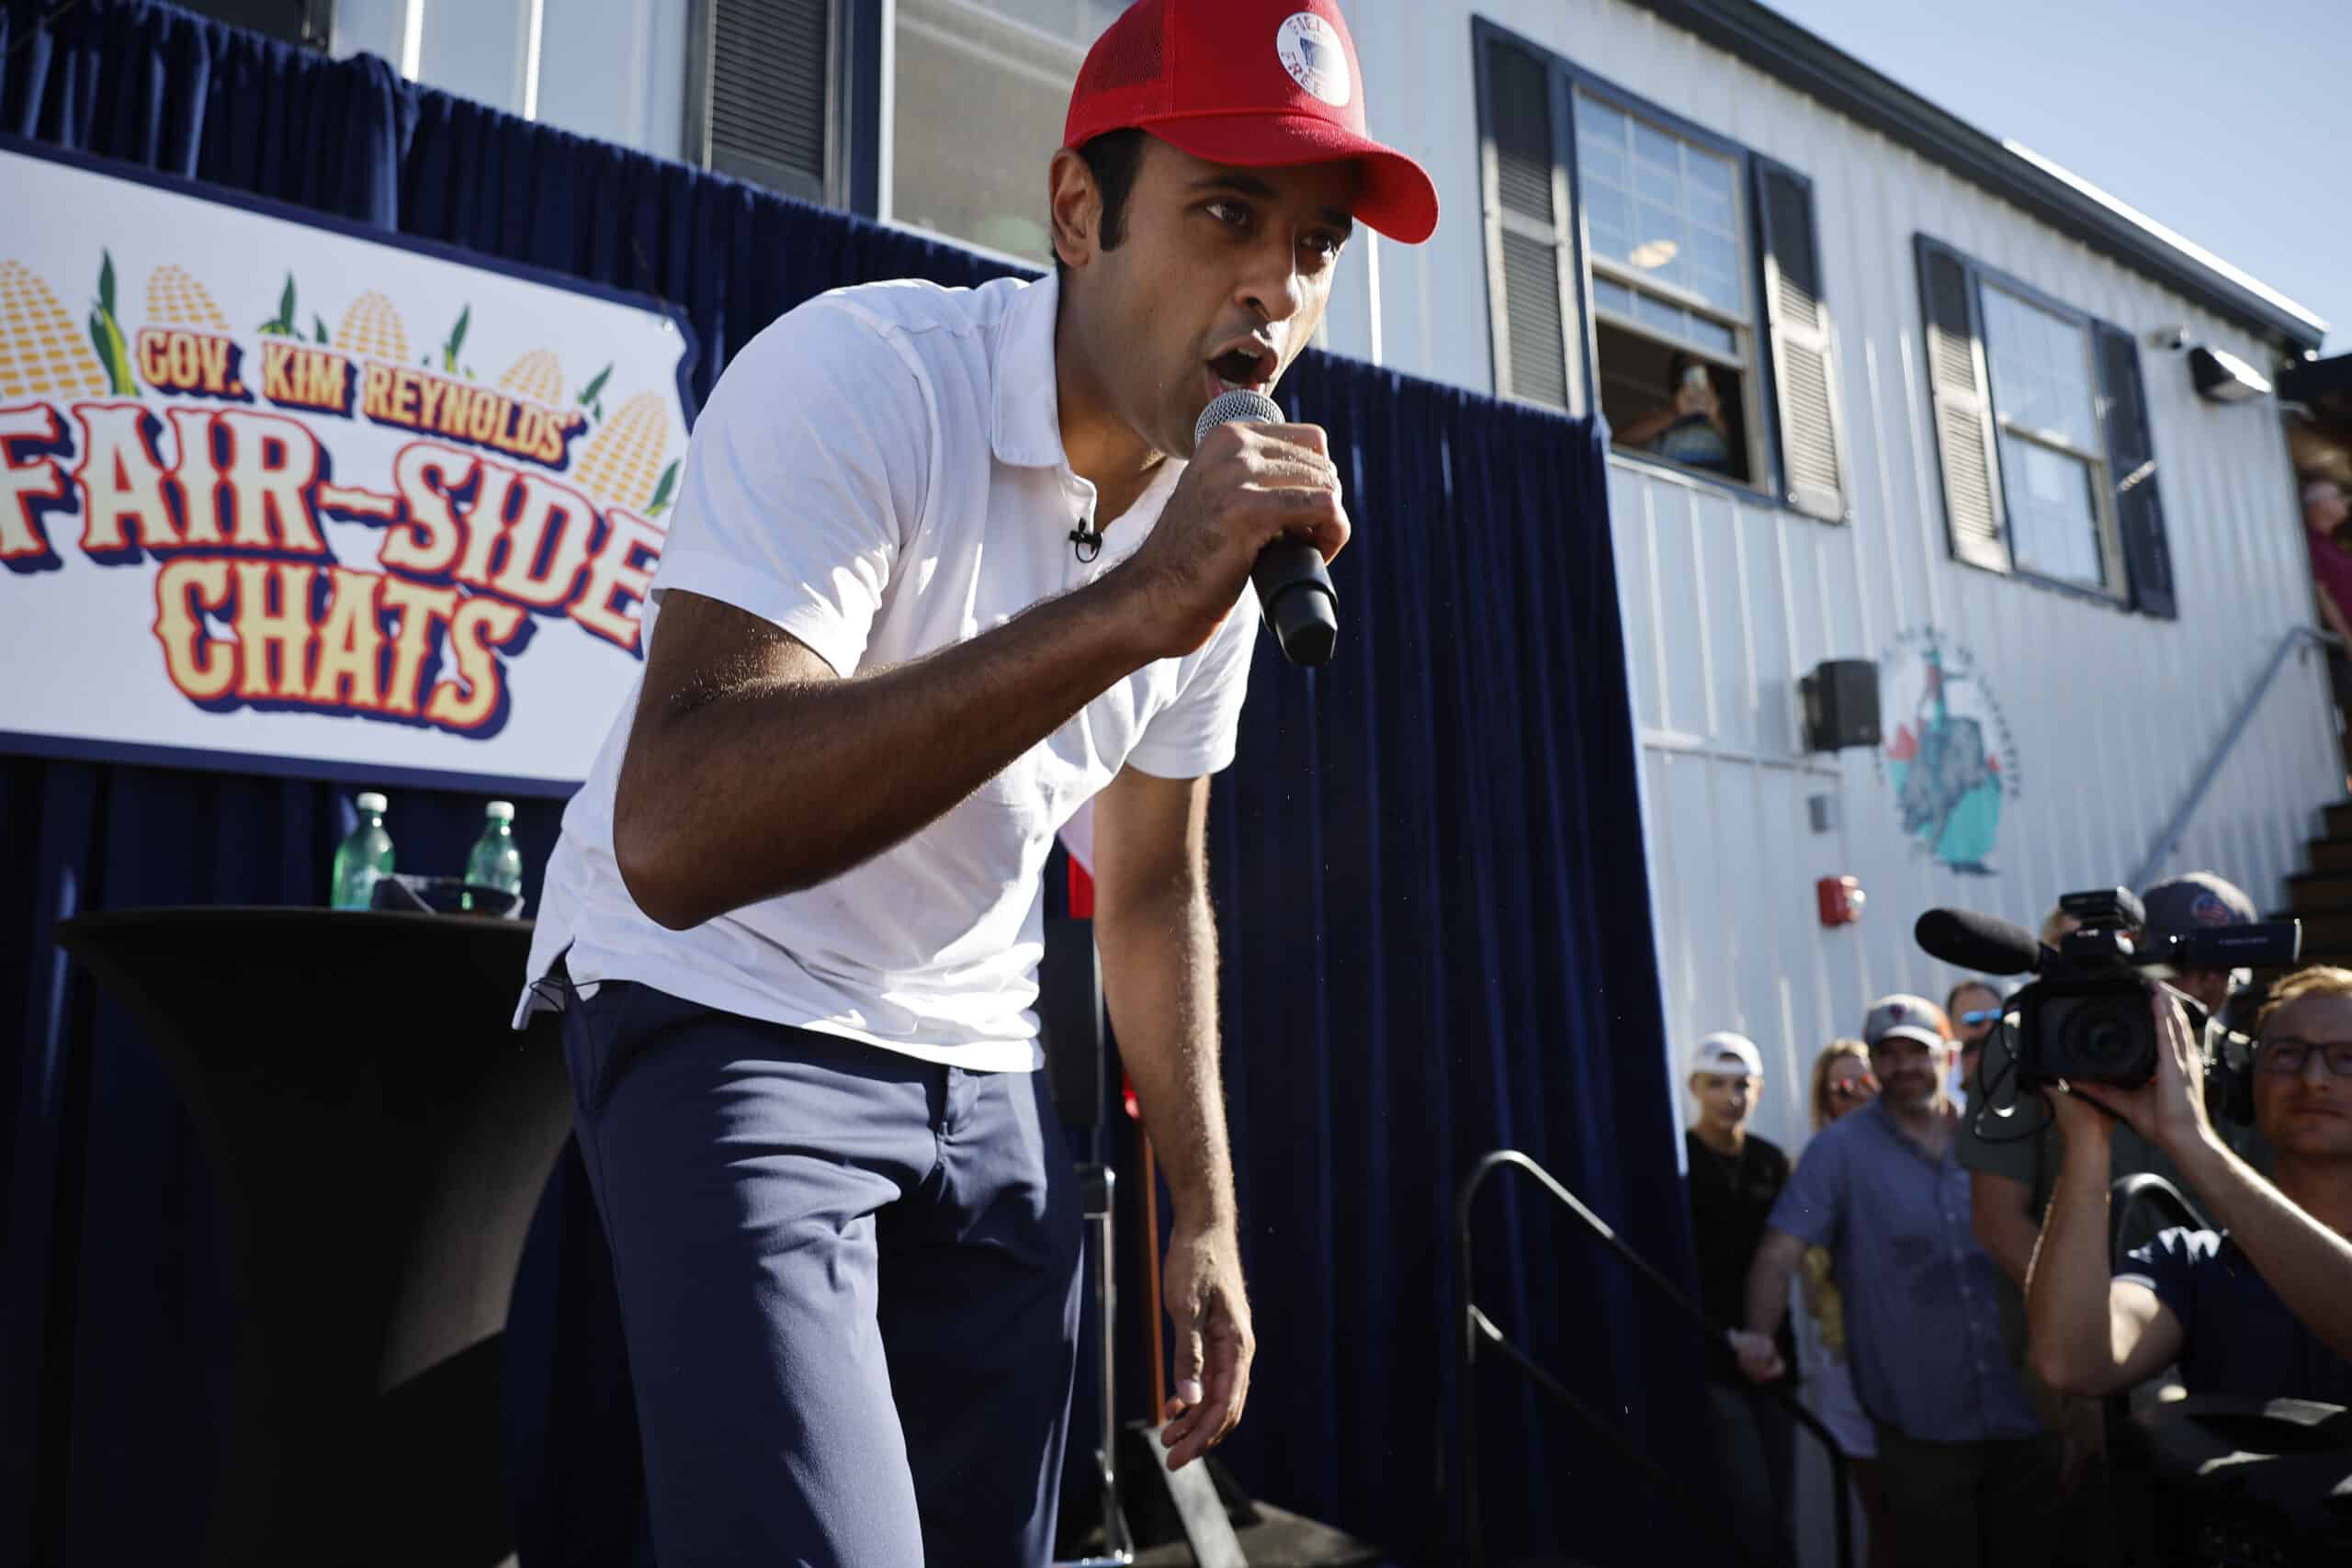 DES MOINES, IOWA - AUGUST 12: Biotech millionaire and Republican presidential candidate Vivek Ramaswamy raps to Eminem's "Lose Yourself" at the conclusion of one of Iowa Governor Kim Reynolds' "Fair-Side Chats" at the Iowa State Fair on August 12, 2023 in Des Moines, Iowa. Republican and Democratic presidential hopefuls are visiting the fair, a tradition in one of the first states that will test candidates with the 2024 caucuses. 